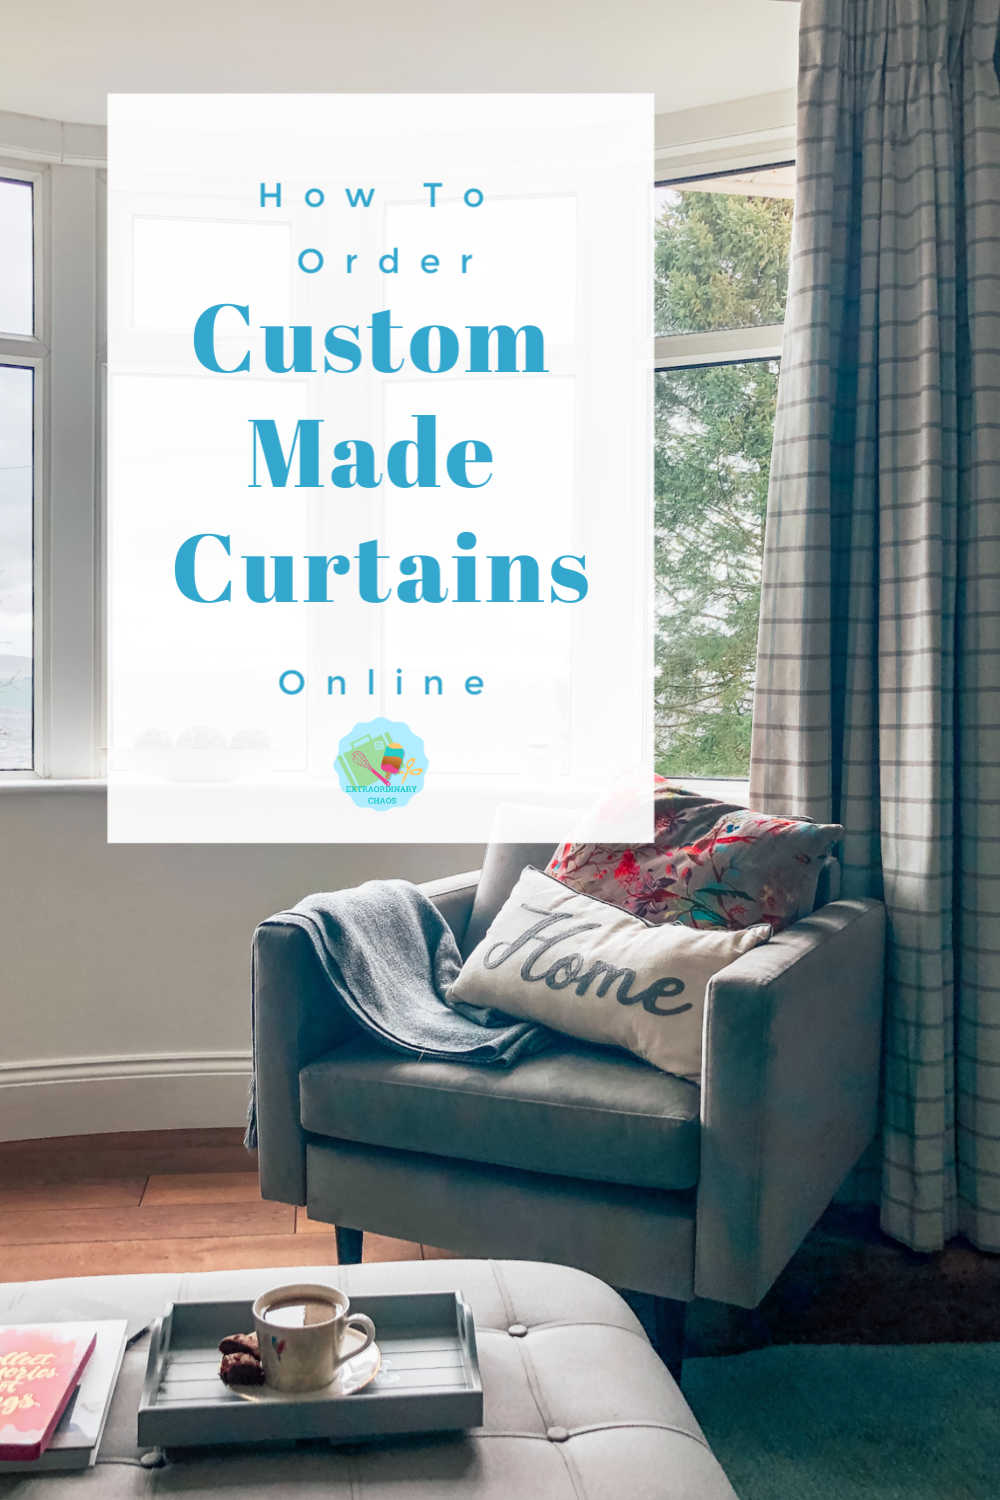 How to order custom made curtains online, including choosing samples, measuring and ordering guide